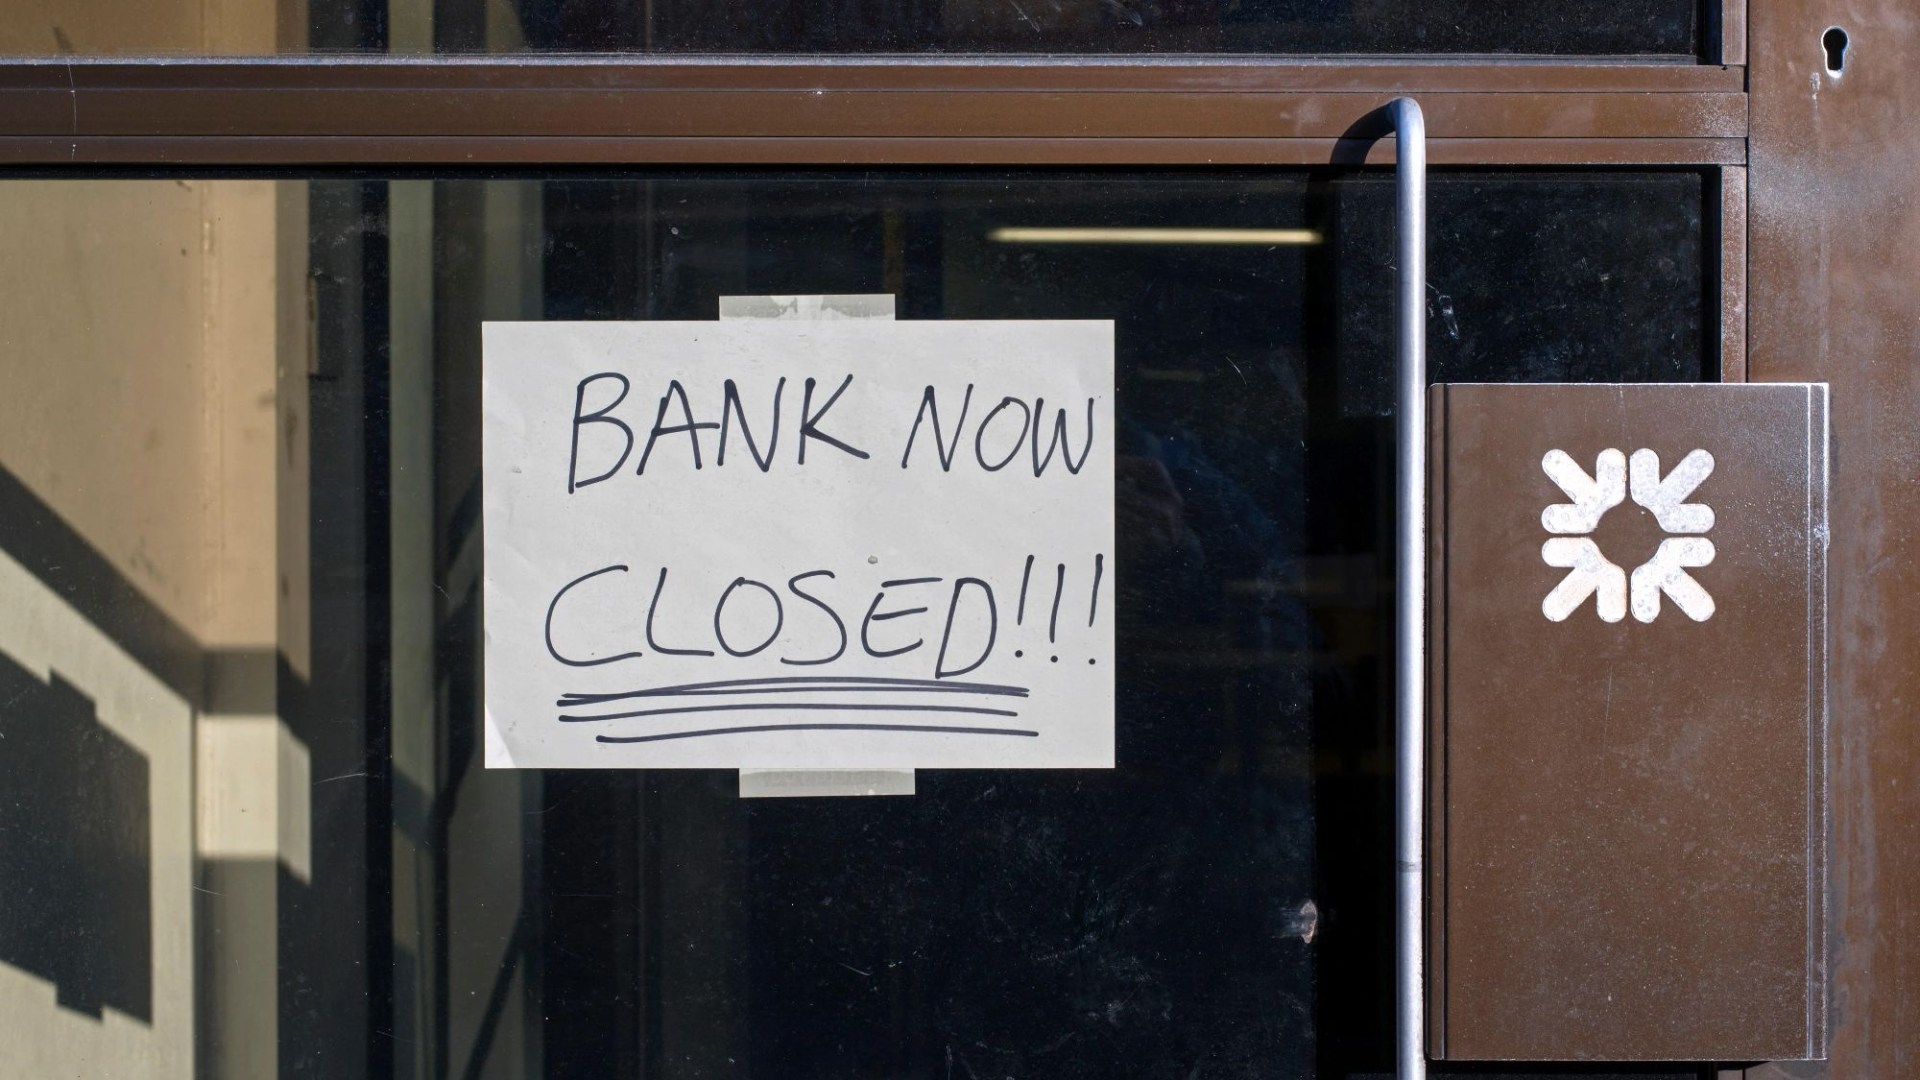 Major high street banks to close 53 more branches in HUGE blow to customers – sell full list of those affected [Video]